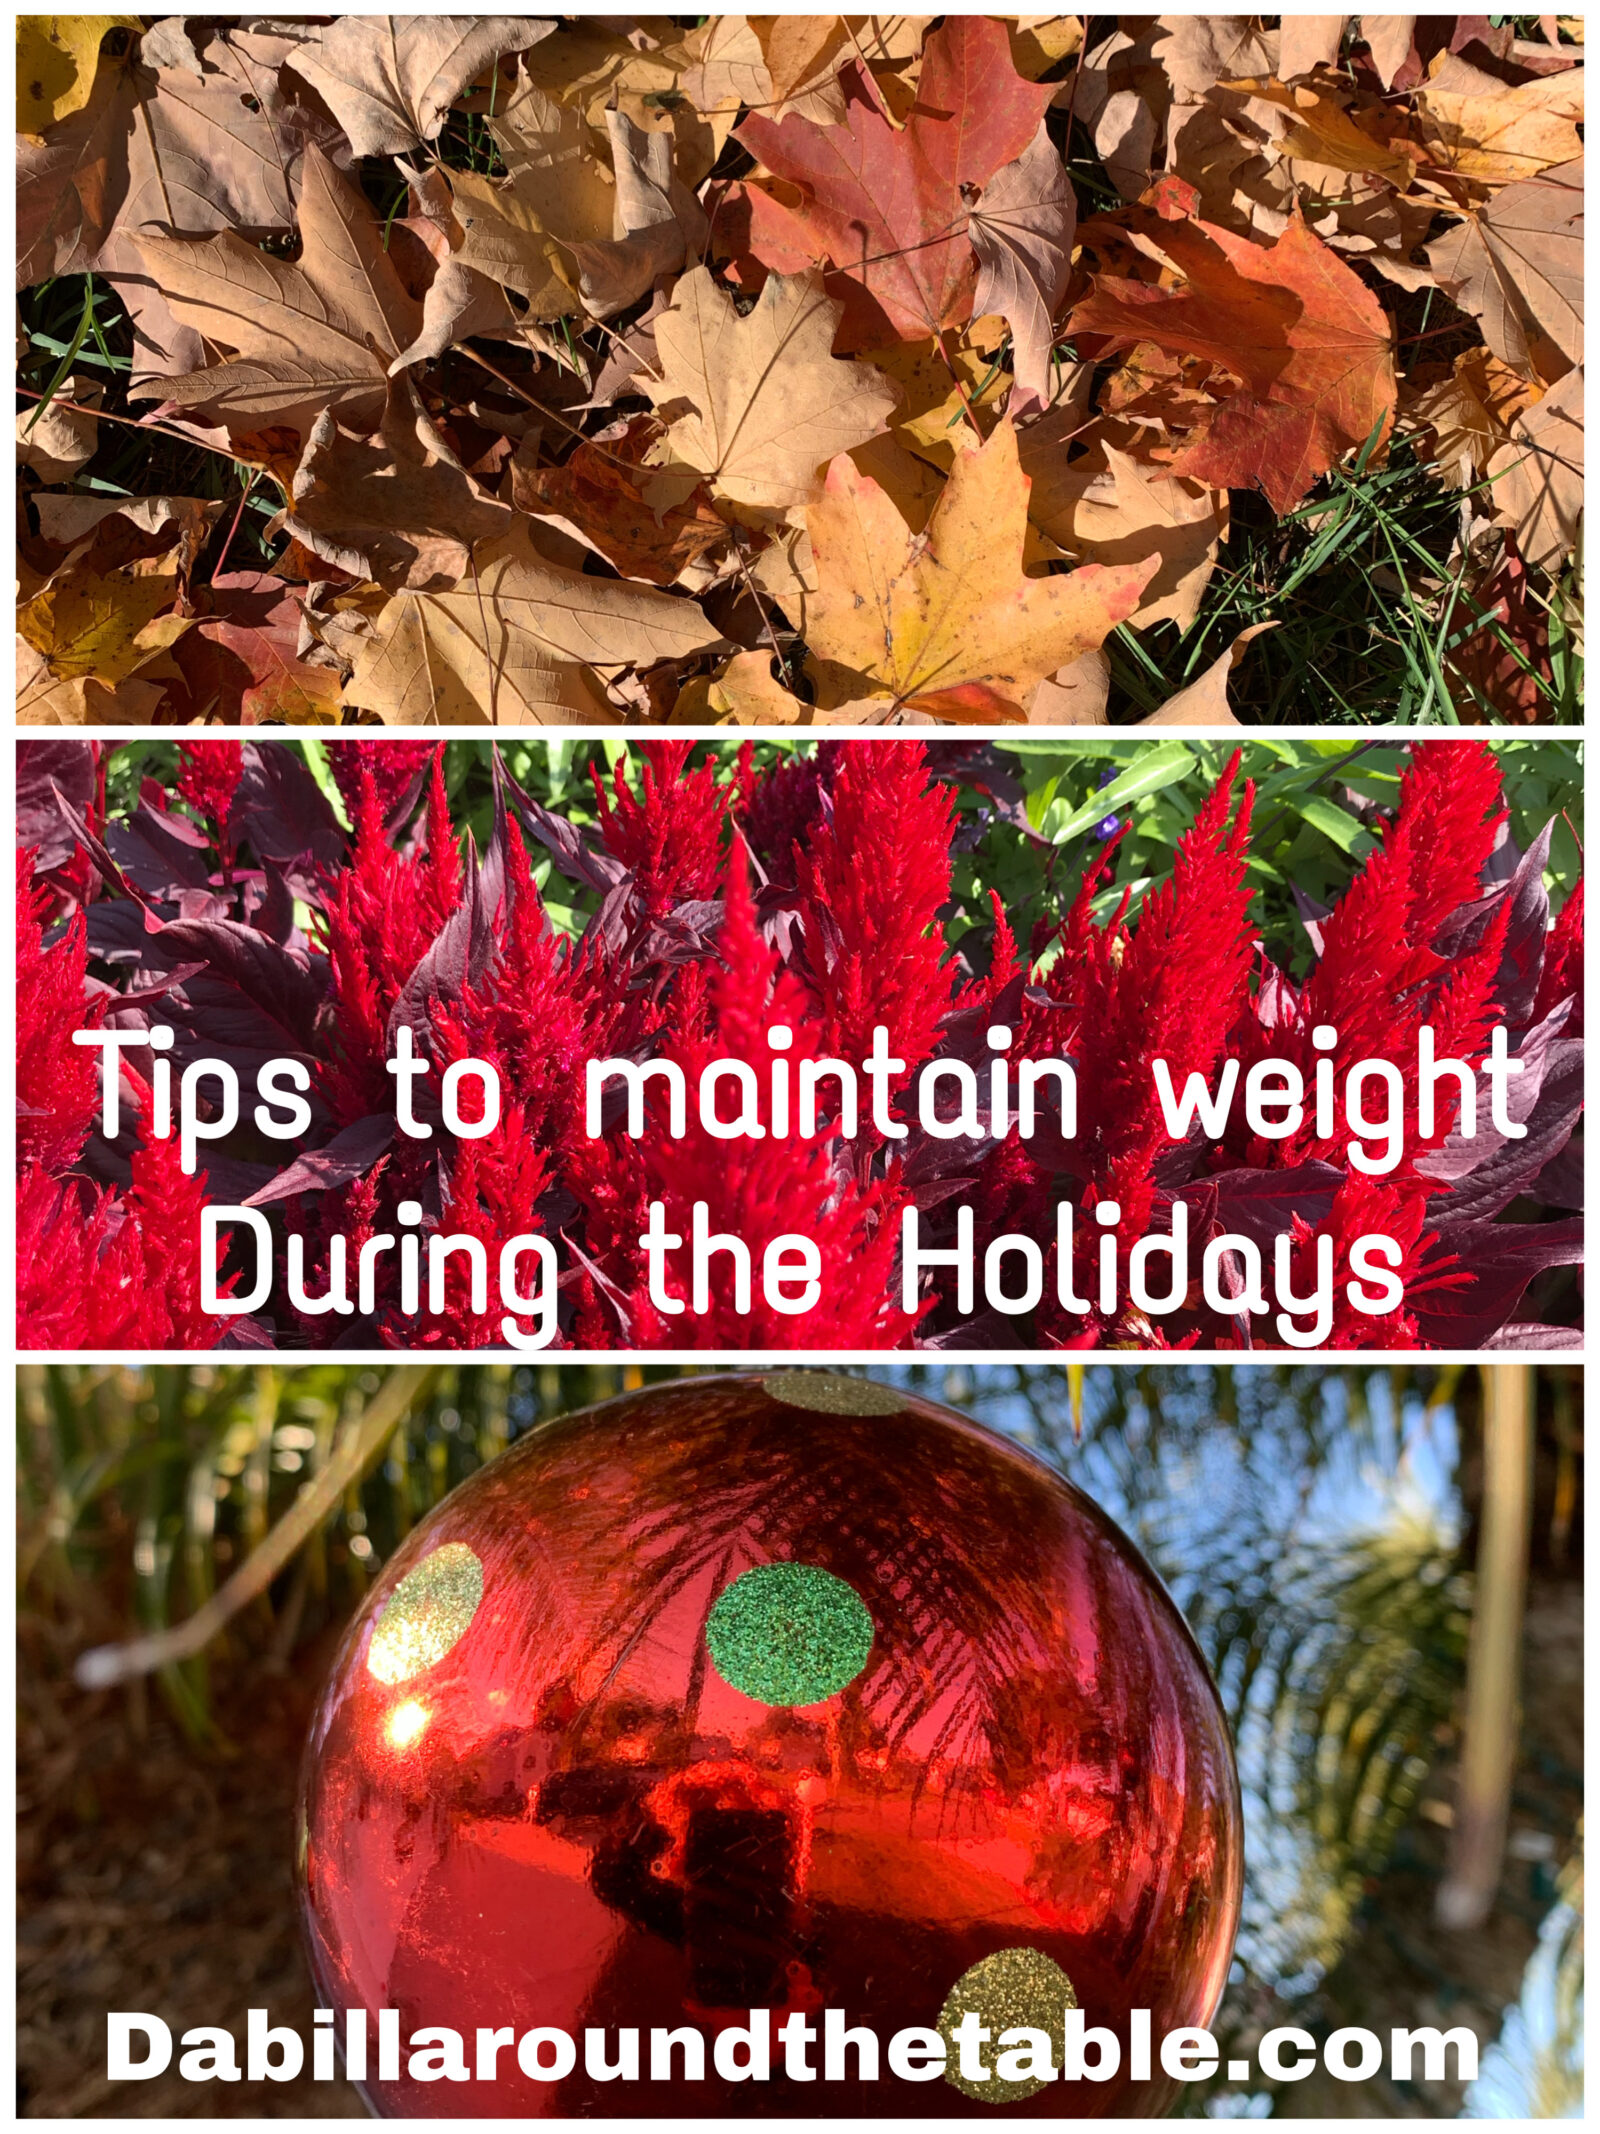 Tips to maintain weight during the holidays.